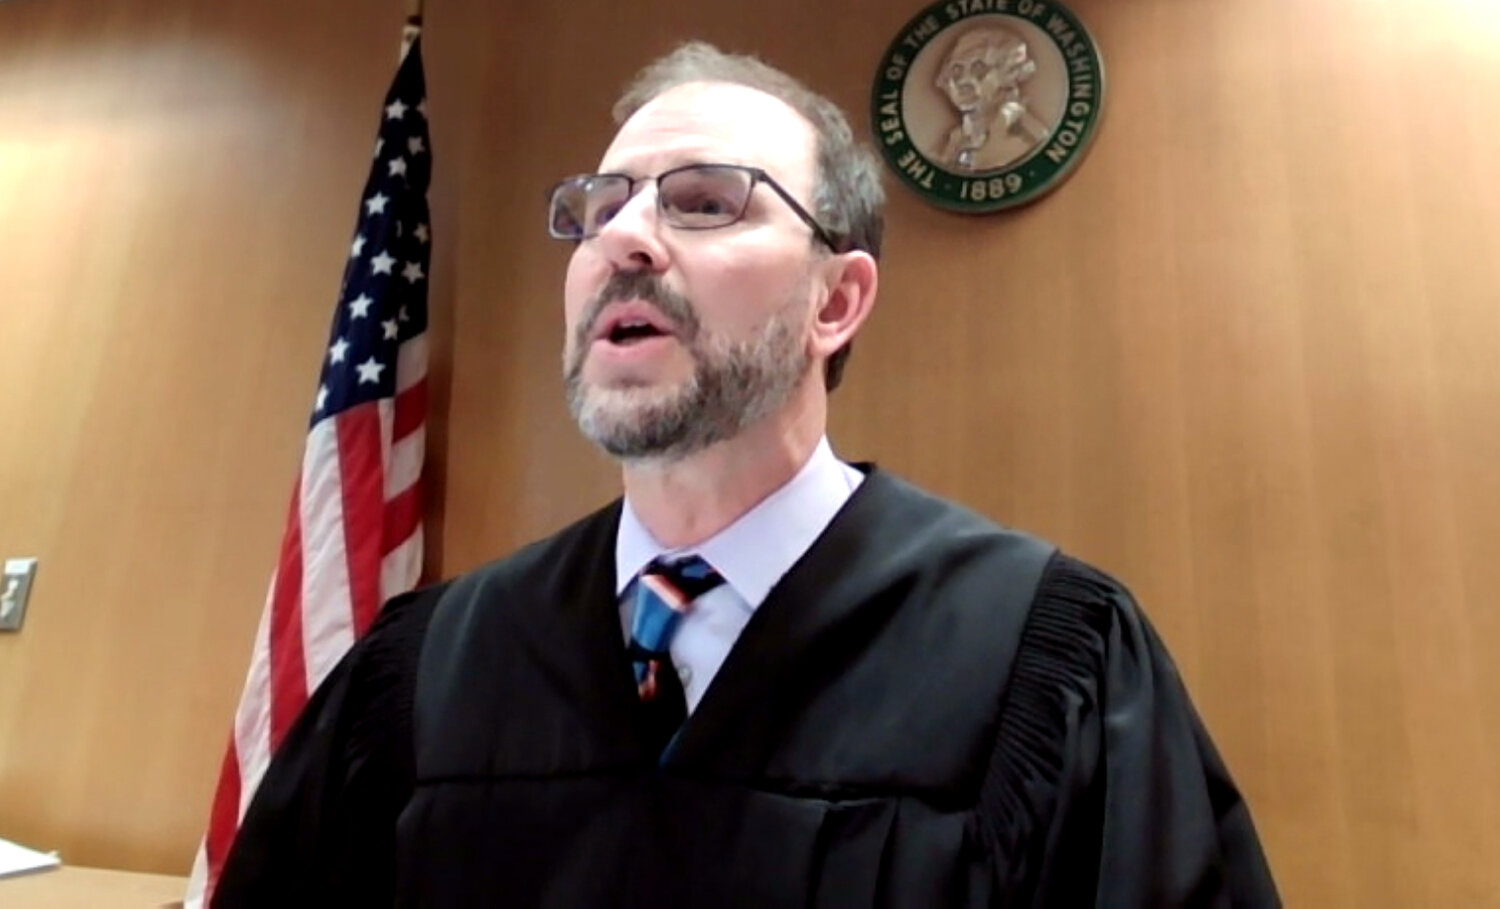 Thurston County Superior Court Judge John Skidner addresses the murder case against Jason Butterton, 38, of Chehalis, in Thurston County Superior Court on Thursday, July 20. Butterton declined to appear at his hearing, citing illness.